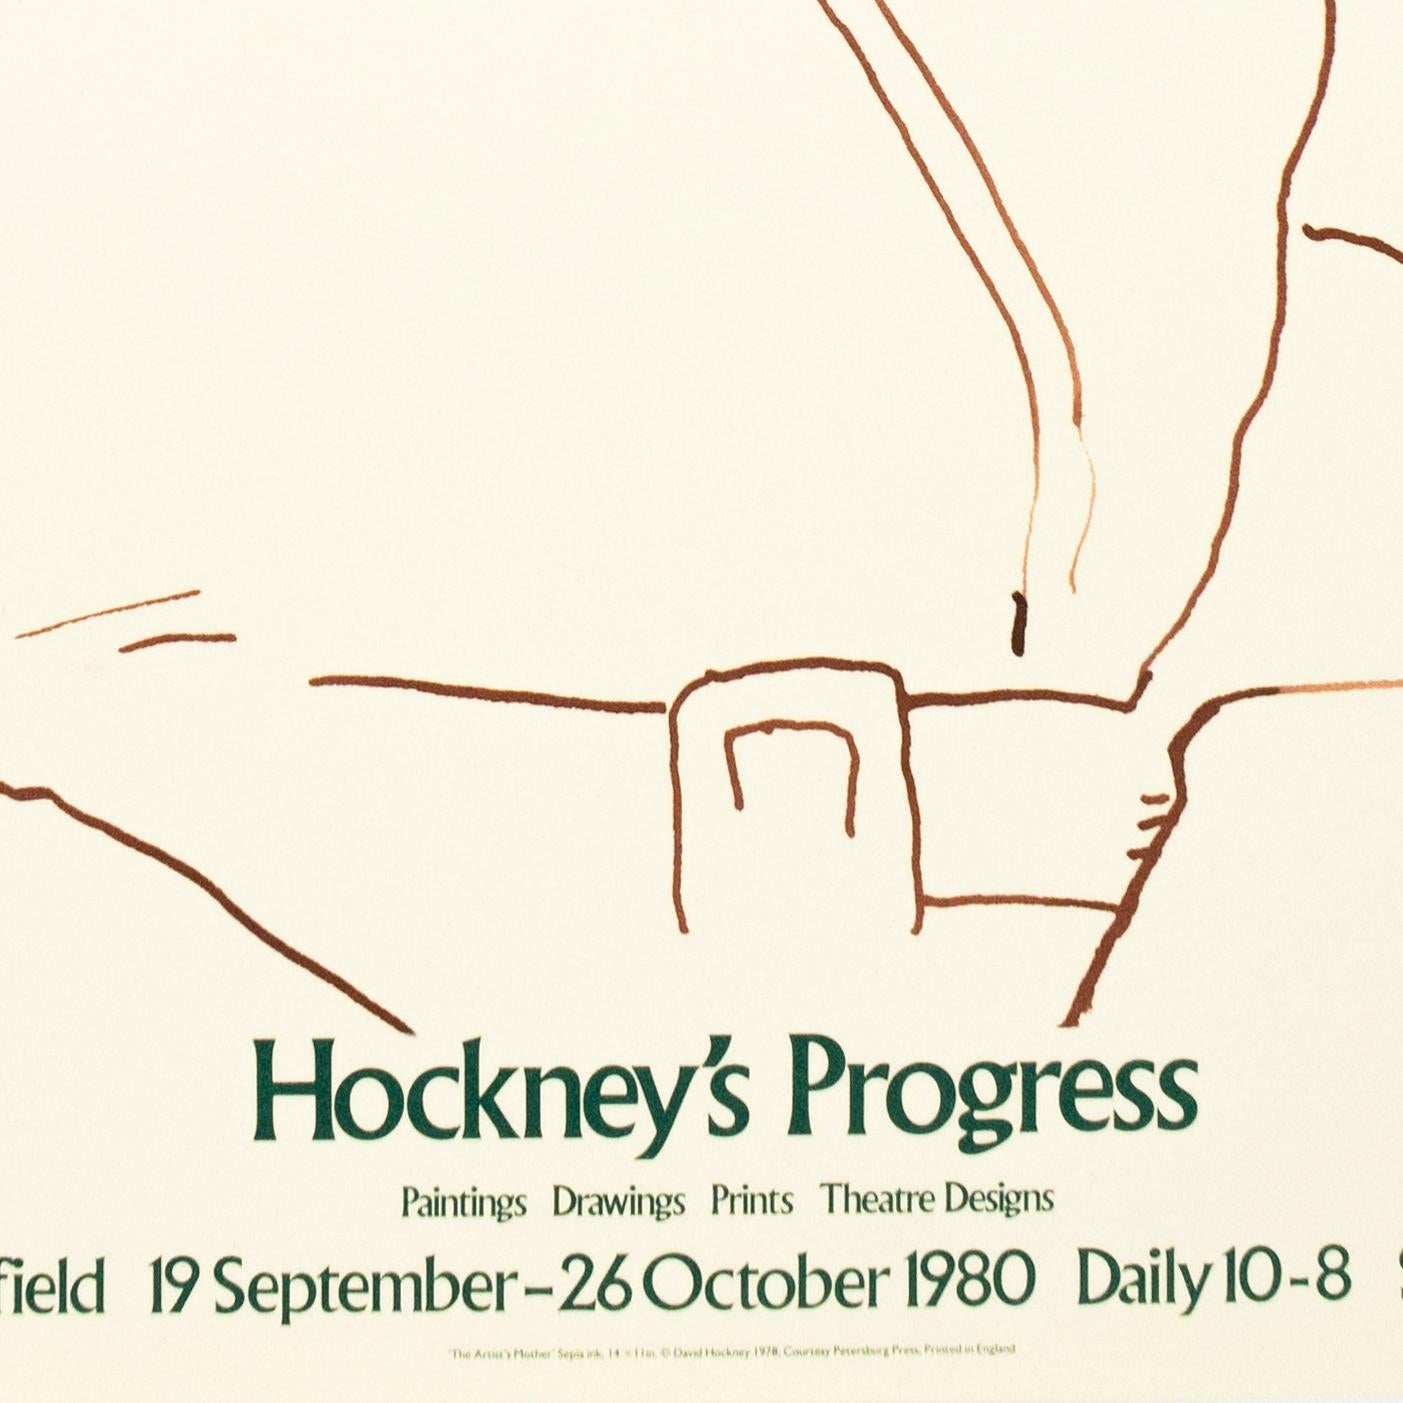 This vintage David Hockney poster features a portrait of the artist's mother, and was created for the exhibition 'Hockney's Progress: Paintings, Drawings, Prints, Theatre Designs', held at the Graves Art Gallery in Sheffield, 19 September - 26